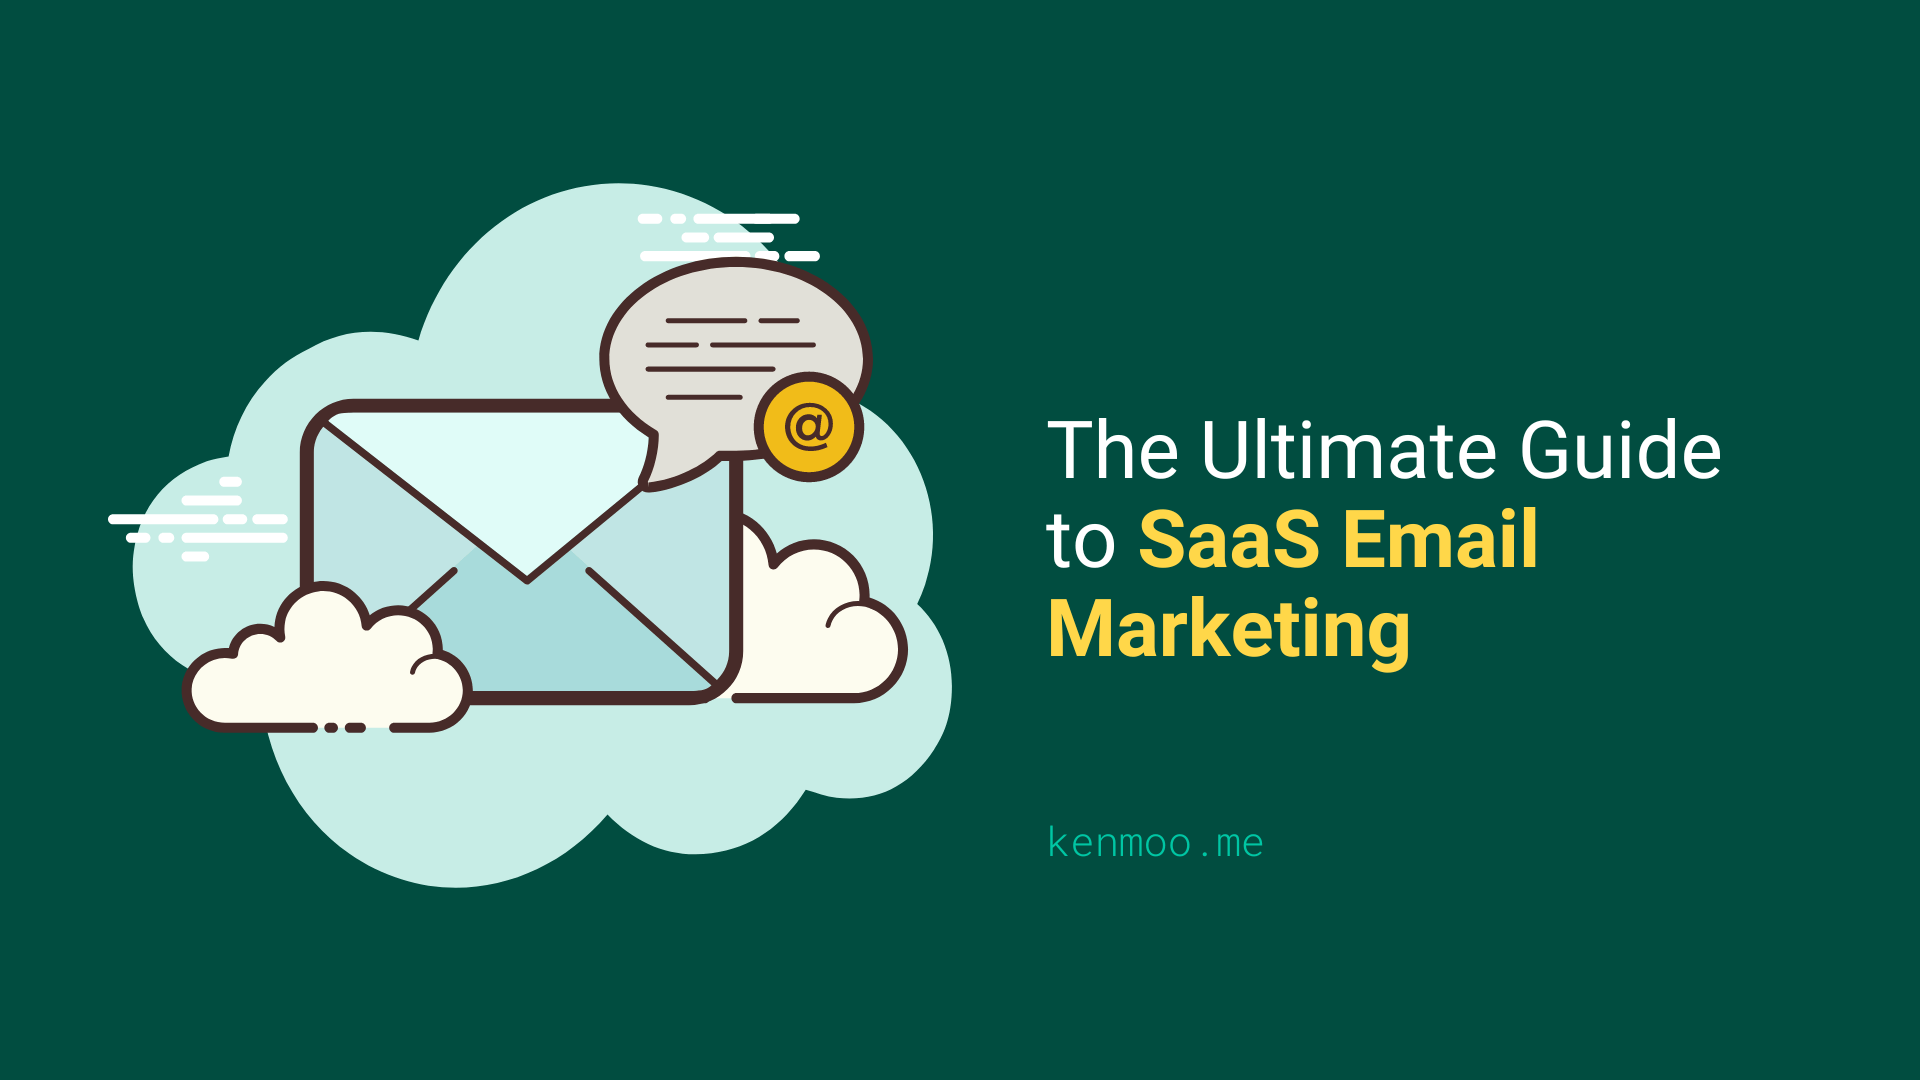 The Ultimate Guide to SaaS Email Marketing